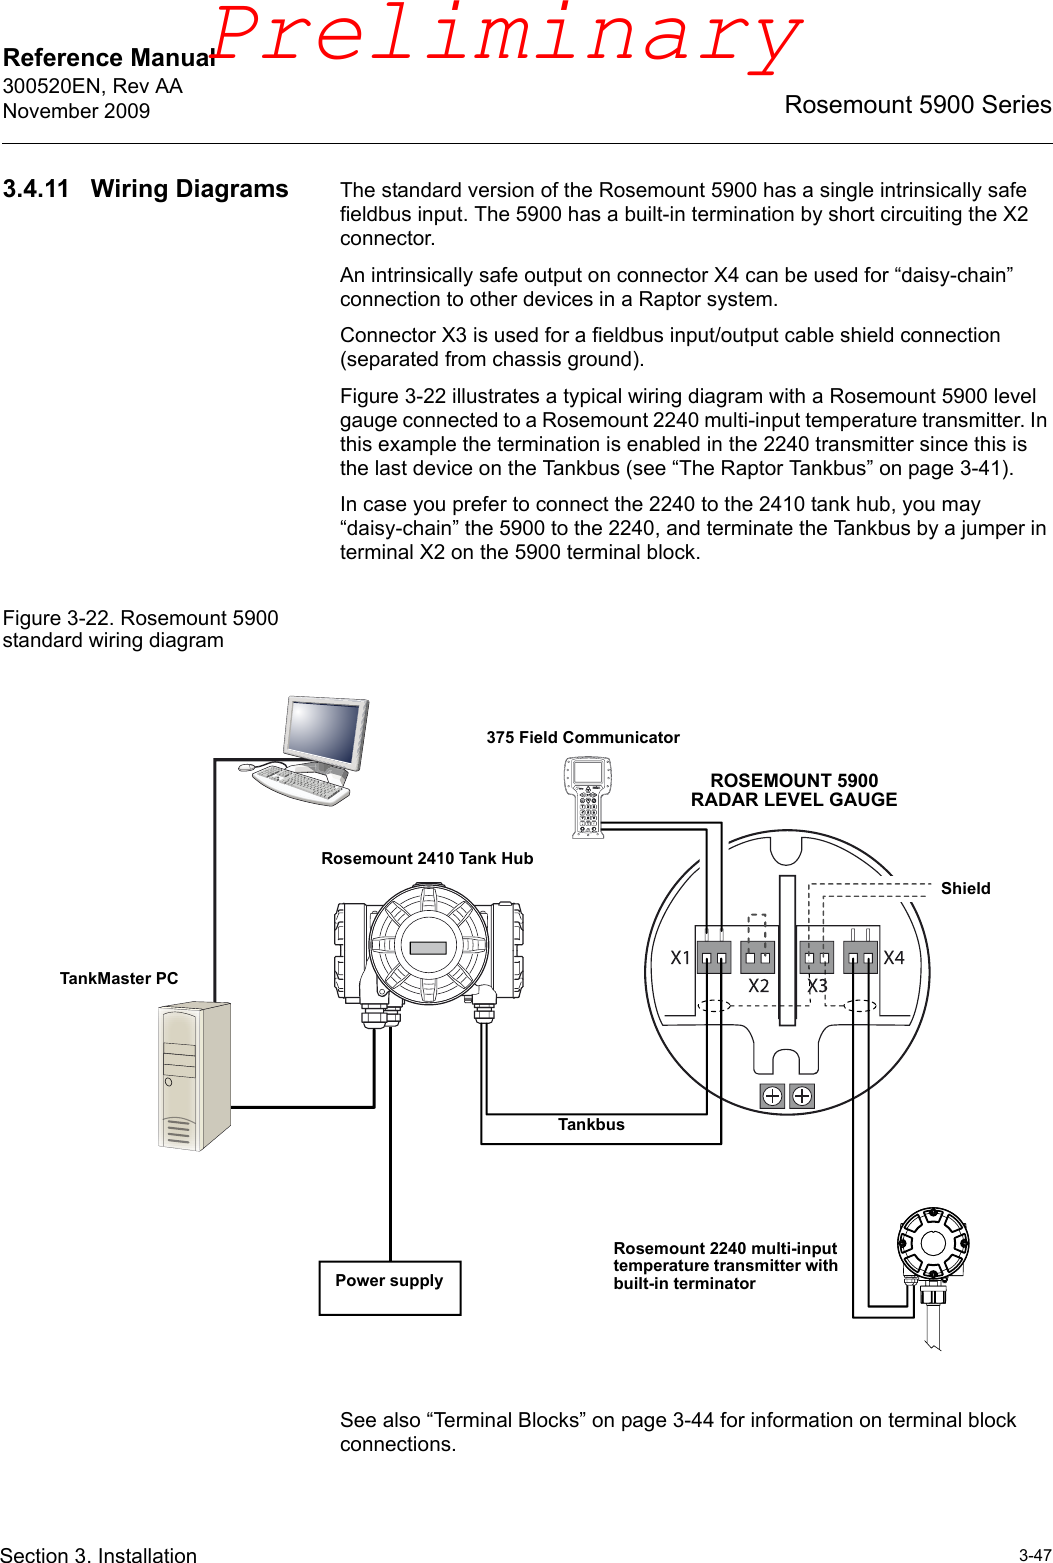 Reference Manual 300520EN, Rev AANovember 20093-47Rosemount 5900 SeriesSection 3. Installation3.4.11 Wiring Diagrams The standard version of the Rosemount 5900 has a single intrinsically safe fieldbus input. The 5900 has a built-in termination by short circuiting the X2 connector. An intrinsically safe output on connector X4 can be used for “daisy-chain” connection to other devices in a Raptor system.Connector X3 is used for a fieldbus input/output cable shield connection (separated from chassis ground).Figure 3-22 illustrates a typical wiring diagram with a Rosemount 5900 level gauge connected to a Rosemount 2240 multi-input temperature transmitter. In this example the termination is enabled in the 2240 transmitter since this is the last device on the Tankbus (see “The Raptor Tankbus” on page 3-41).In case you prefer to connect the 2240 to the 2410 tank hub, you may “daisy-chain” the 5900 to the 2240, and terminate the Tankbus by a jumper in terminal X2 on the 5900 terminal block.Figure 3-22. Rosemount 5900 standard wiring diagramSee also “Terminal Blocks” on page 3-44 for information on terminal block connections. Rosemount 2410 Tank HubRosemount 2240 multi-input temperature transmitter with built-in terminatorTankMaster PCTankbusShieldROSEMOUNT 5900 RADAR LEVEL GAUGEPower supply375 Field CommunicatorPreliminary